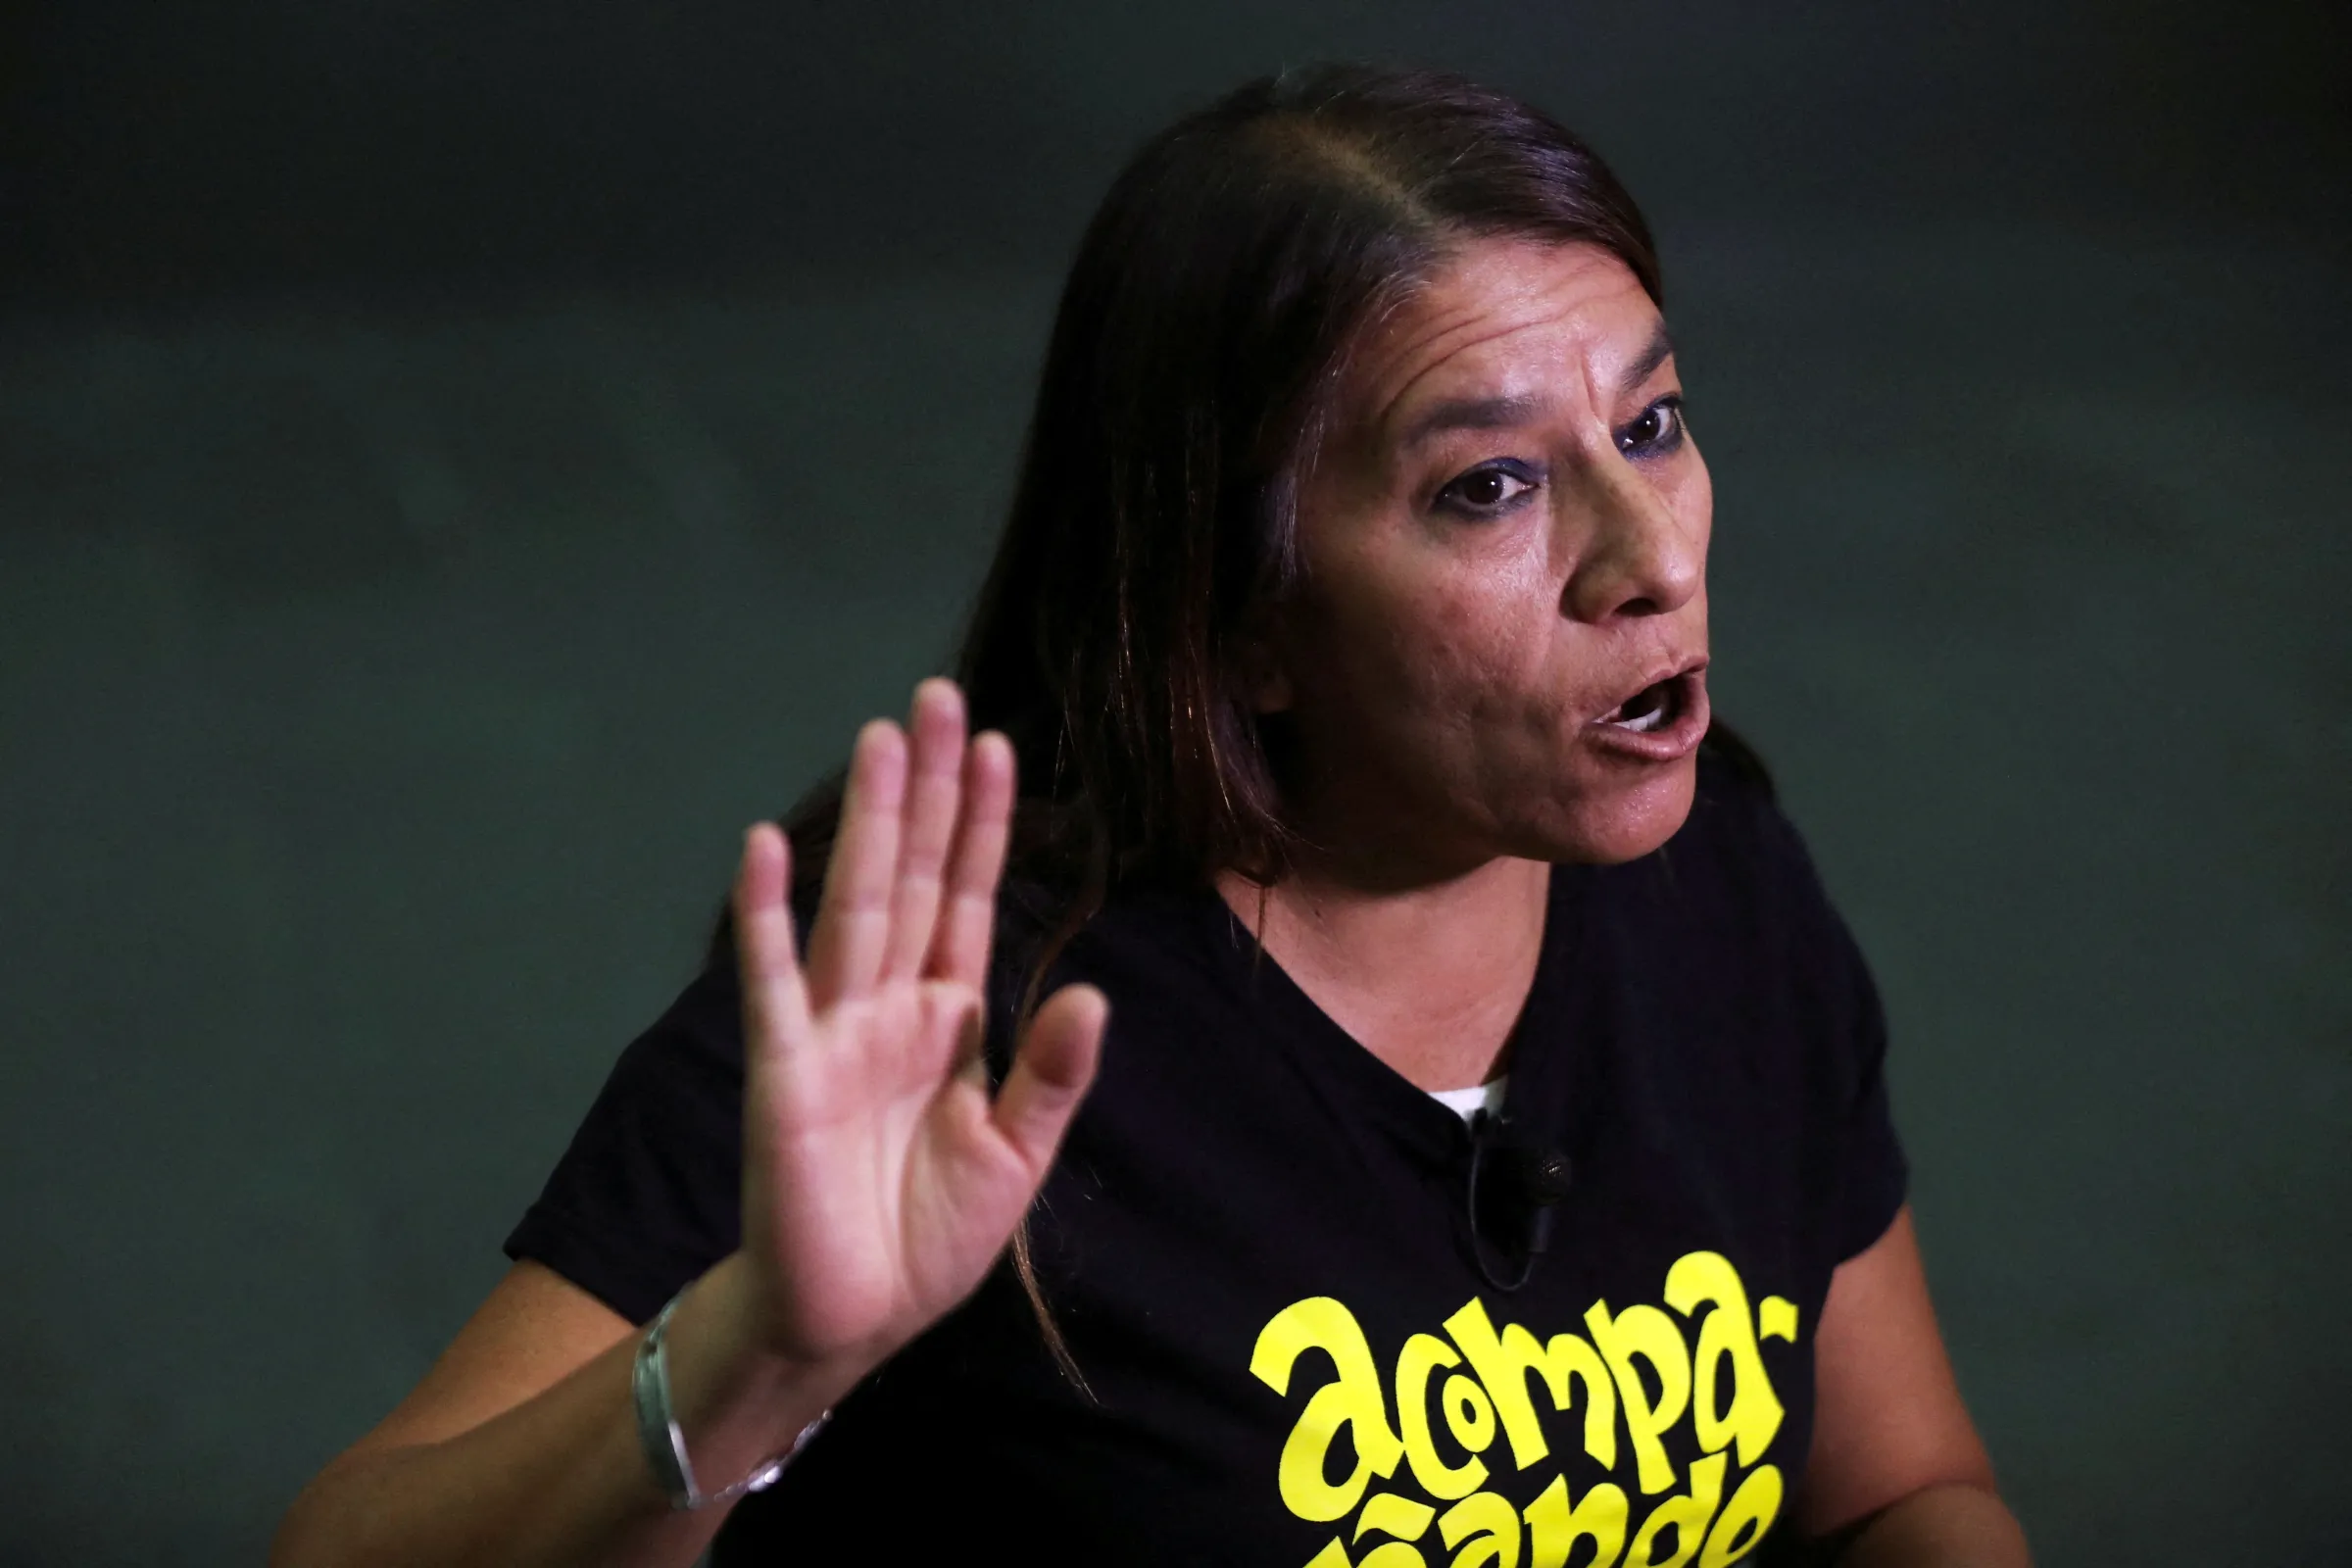 Veronica Cruz, who runs abortion rights organization Las Libres in the central Mexican state of Guanajuato, gestures during an interview with Reuters